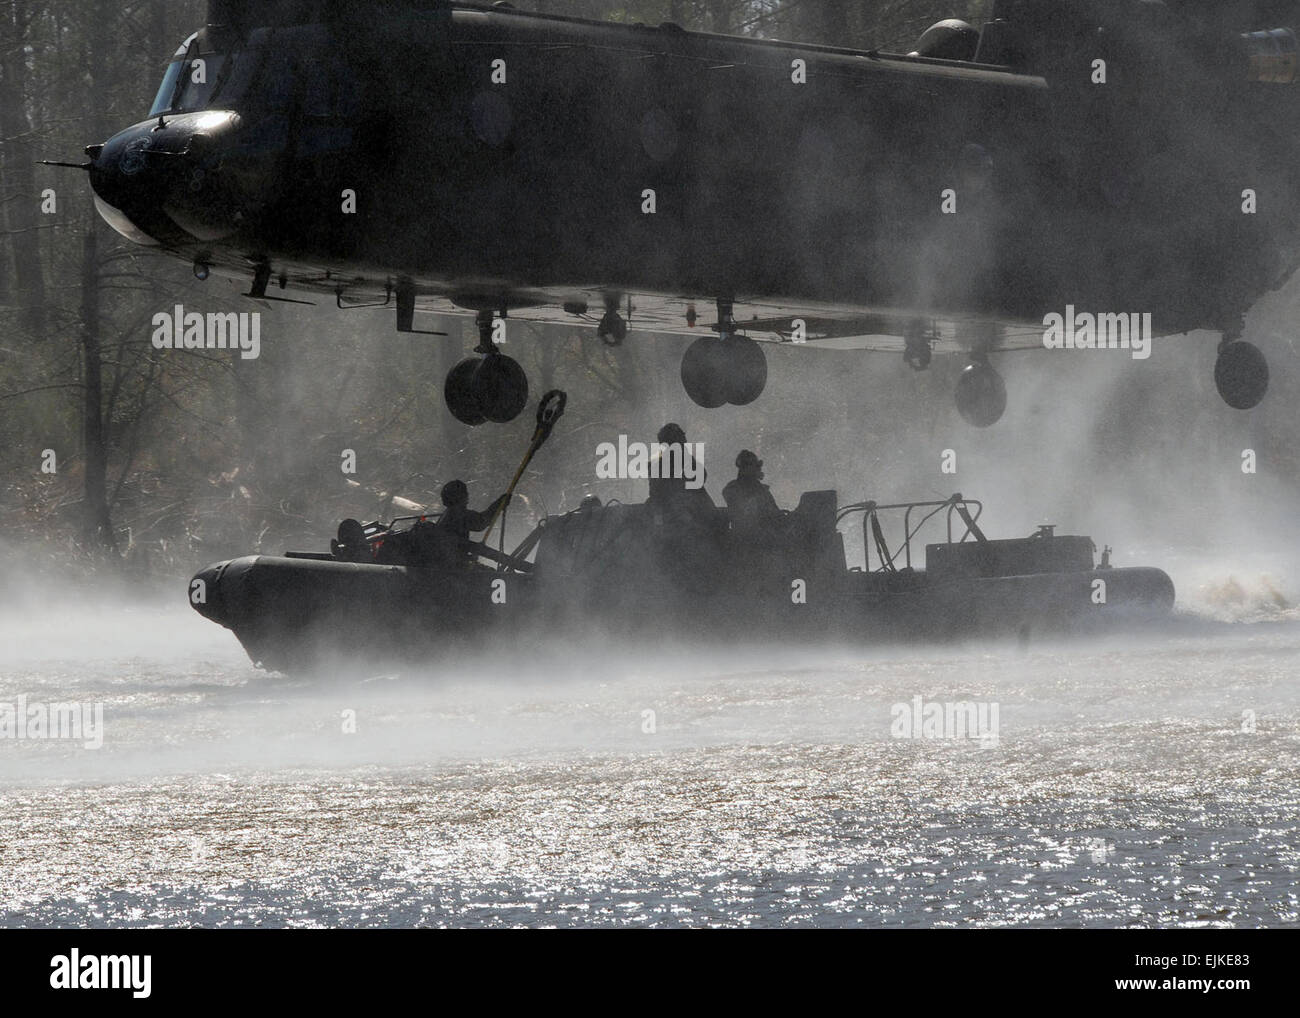 An Army CH-47D Chinook helicopter assigned to the 159th Aviation Regiment out of Fort Eustis, Va., hovers over an 11-meter rigid-hull inflatable boat RHIB during a maritime external air transportation system along the Pearl River in Mississippi Feb. 14, 2008. Special warfare combatant-craft crewmembers aboard the RHIB secured the boat to the helicopter with specter slings and used a caving ladder to board. CH-47D Chinook helicopters can transport RHIB's over land or water.  Mass Communication Specialist 3rd Class Robyn Gerstenslager Stock Photo